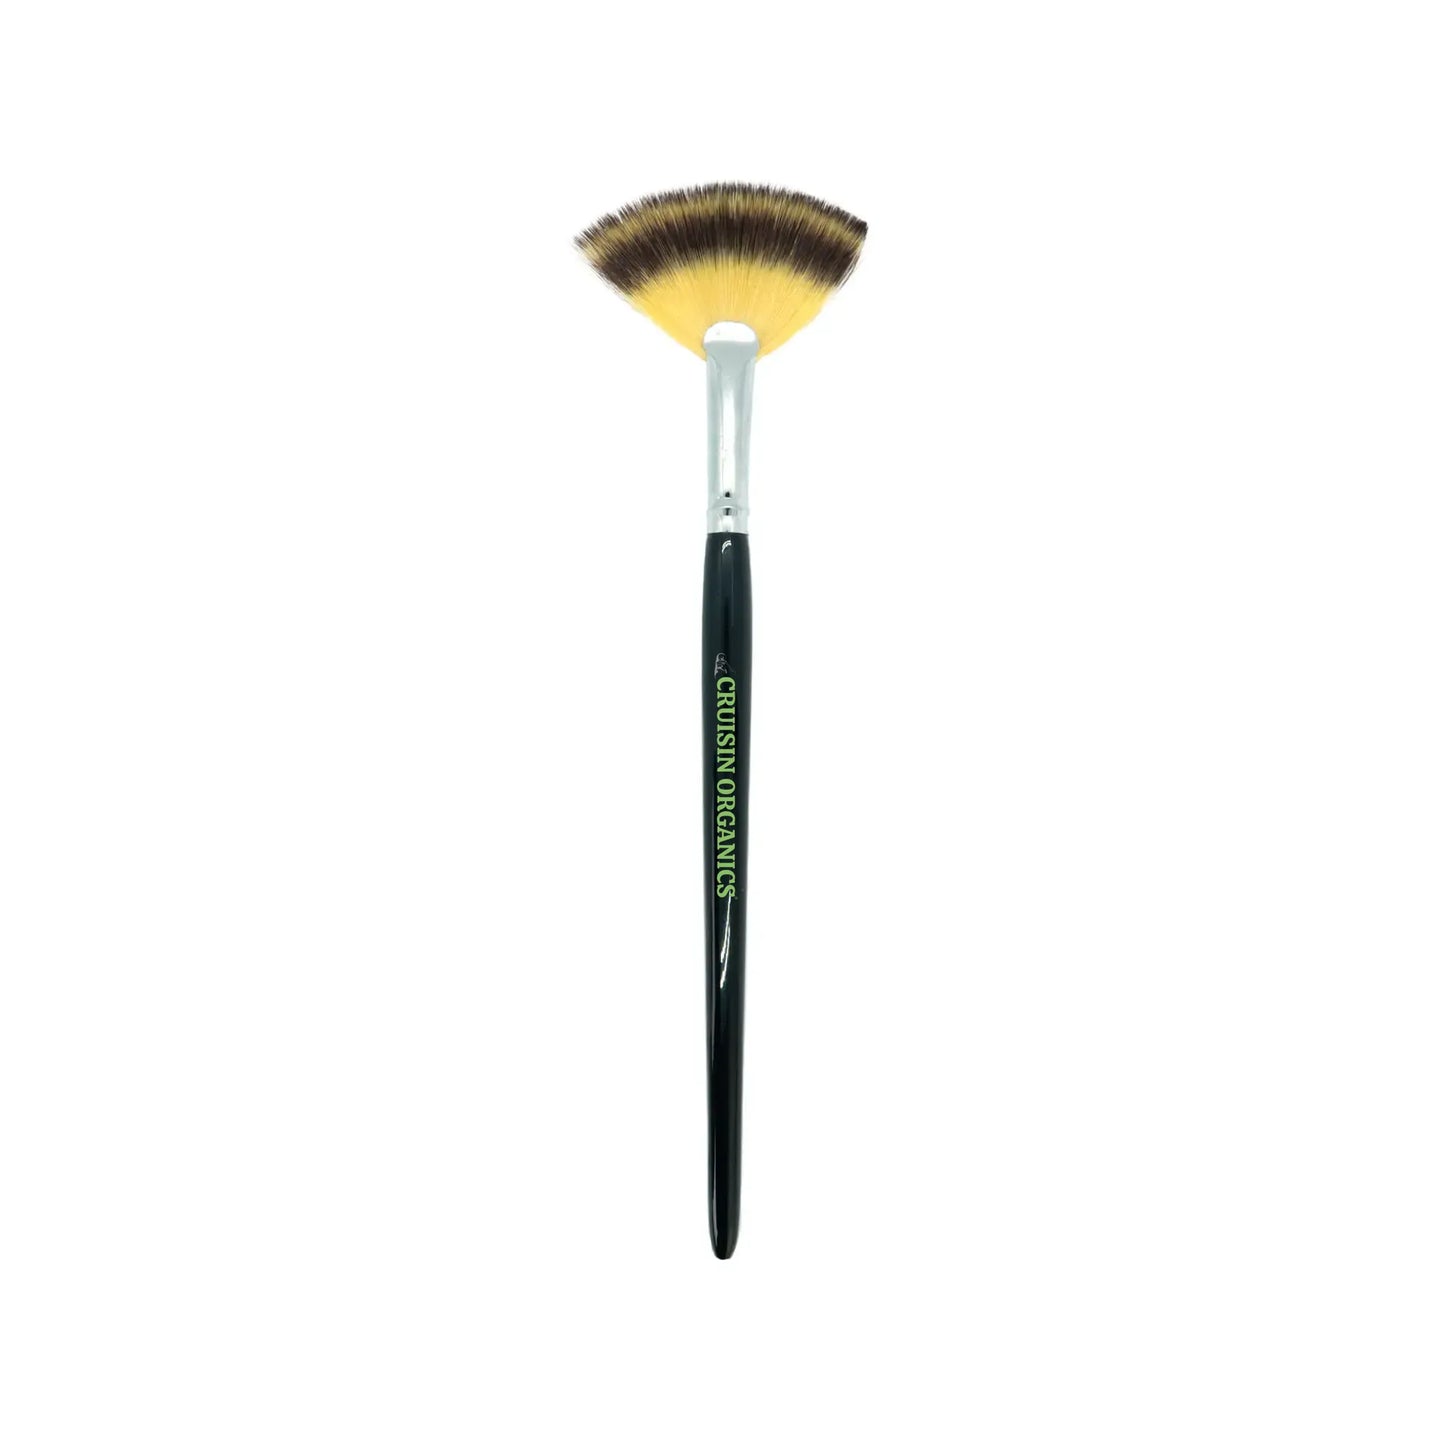 Our Cruisin Organics fan brush is light and feathery to take care of all your powders! Add this fan brush to your list! This is the perfect brush for gently sweeping on dewy highlights, diffusing color on your cheeks, and sweeping away excess powder. The light bristles and their flat shape will help with accurate brushing!